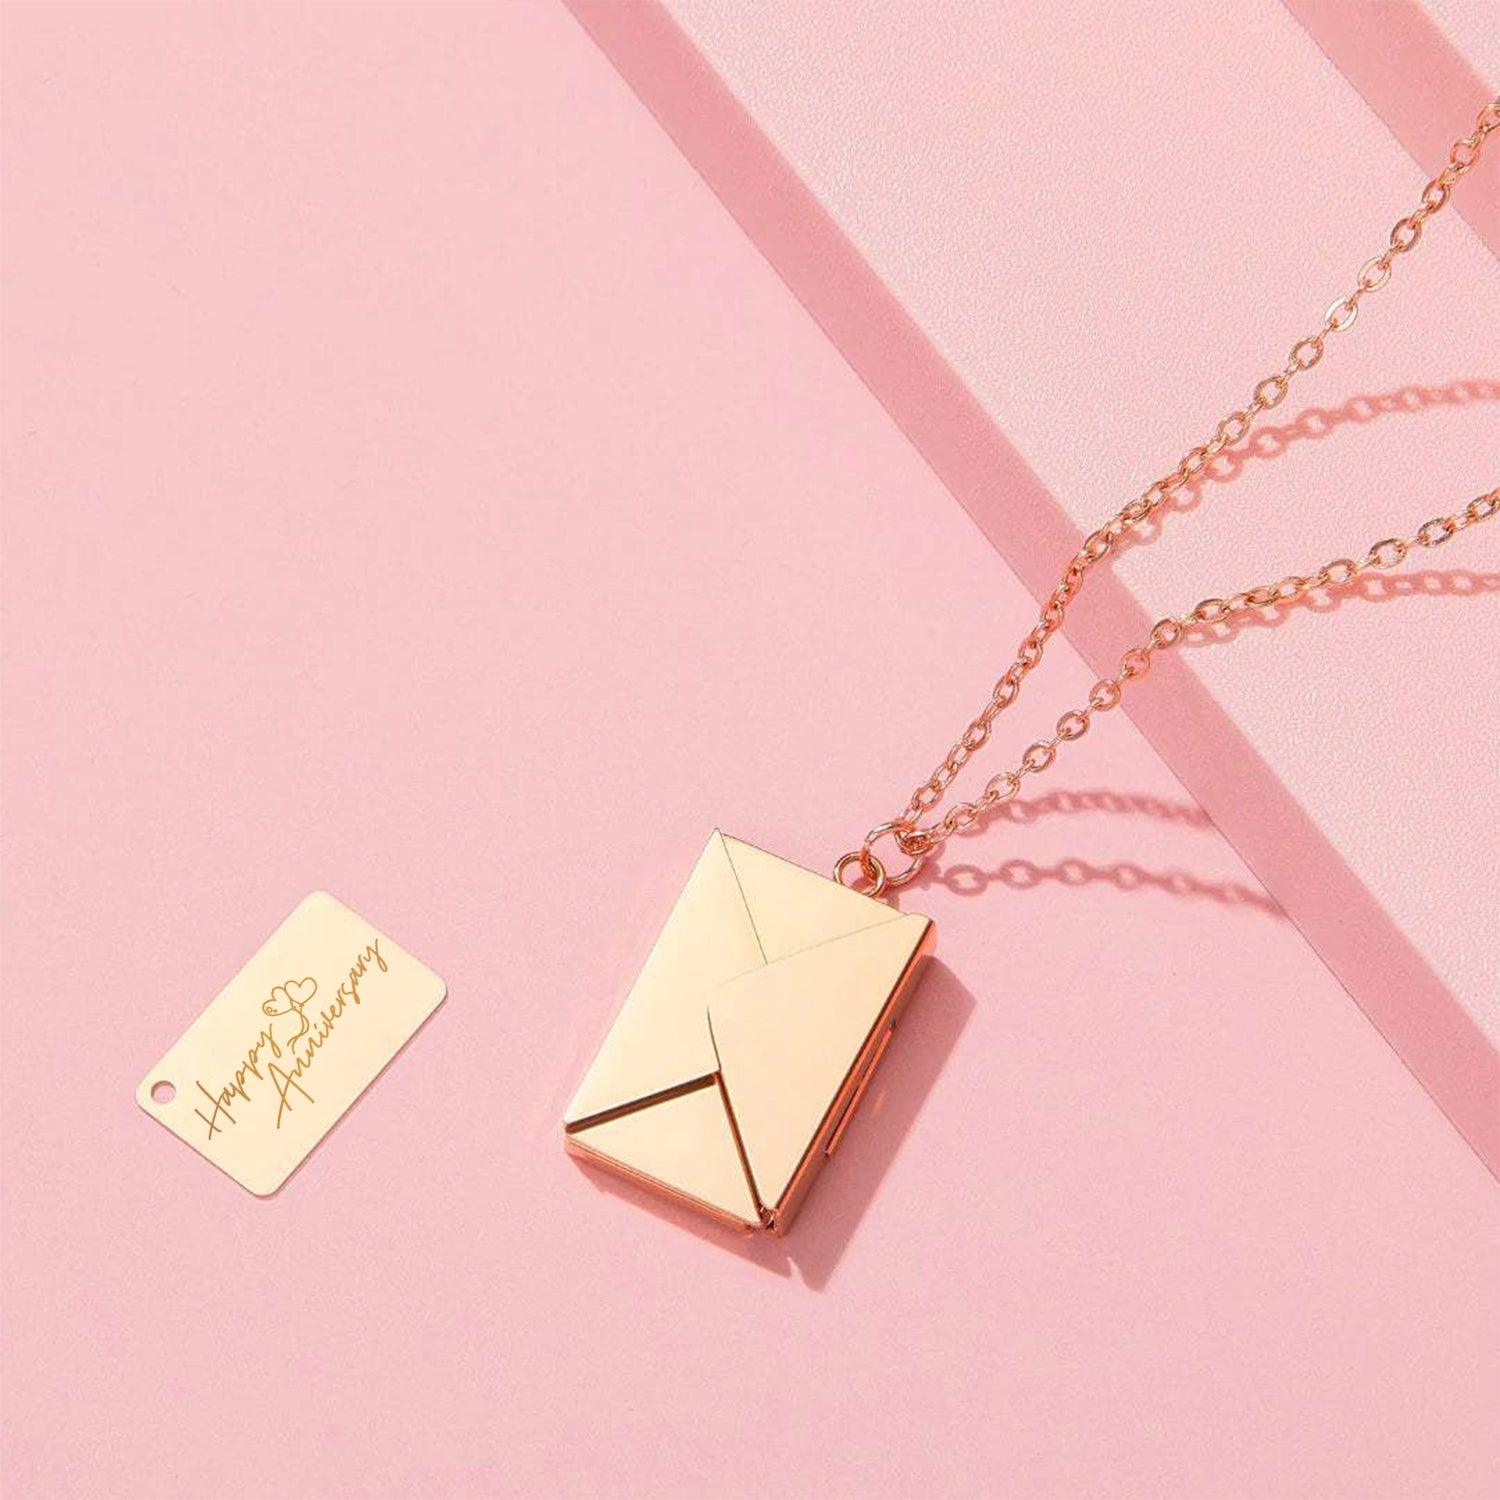 Love Letter Necklace - This Year's Best Gift Ideas